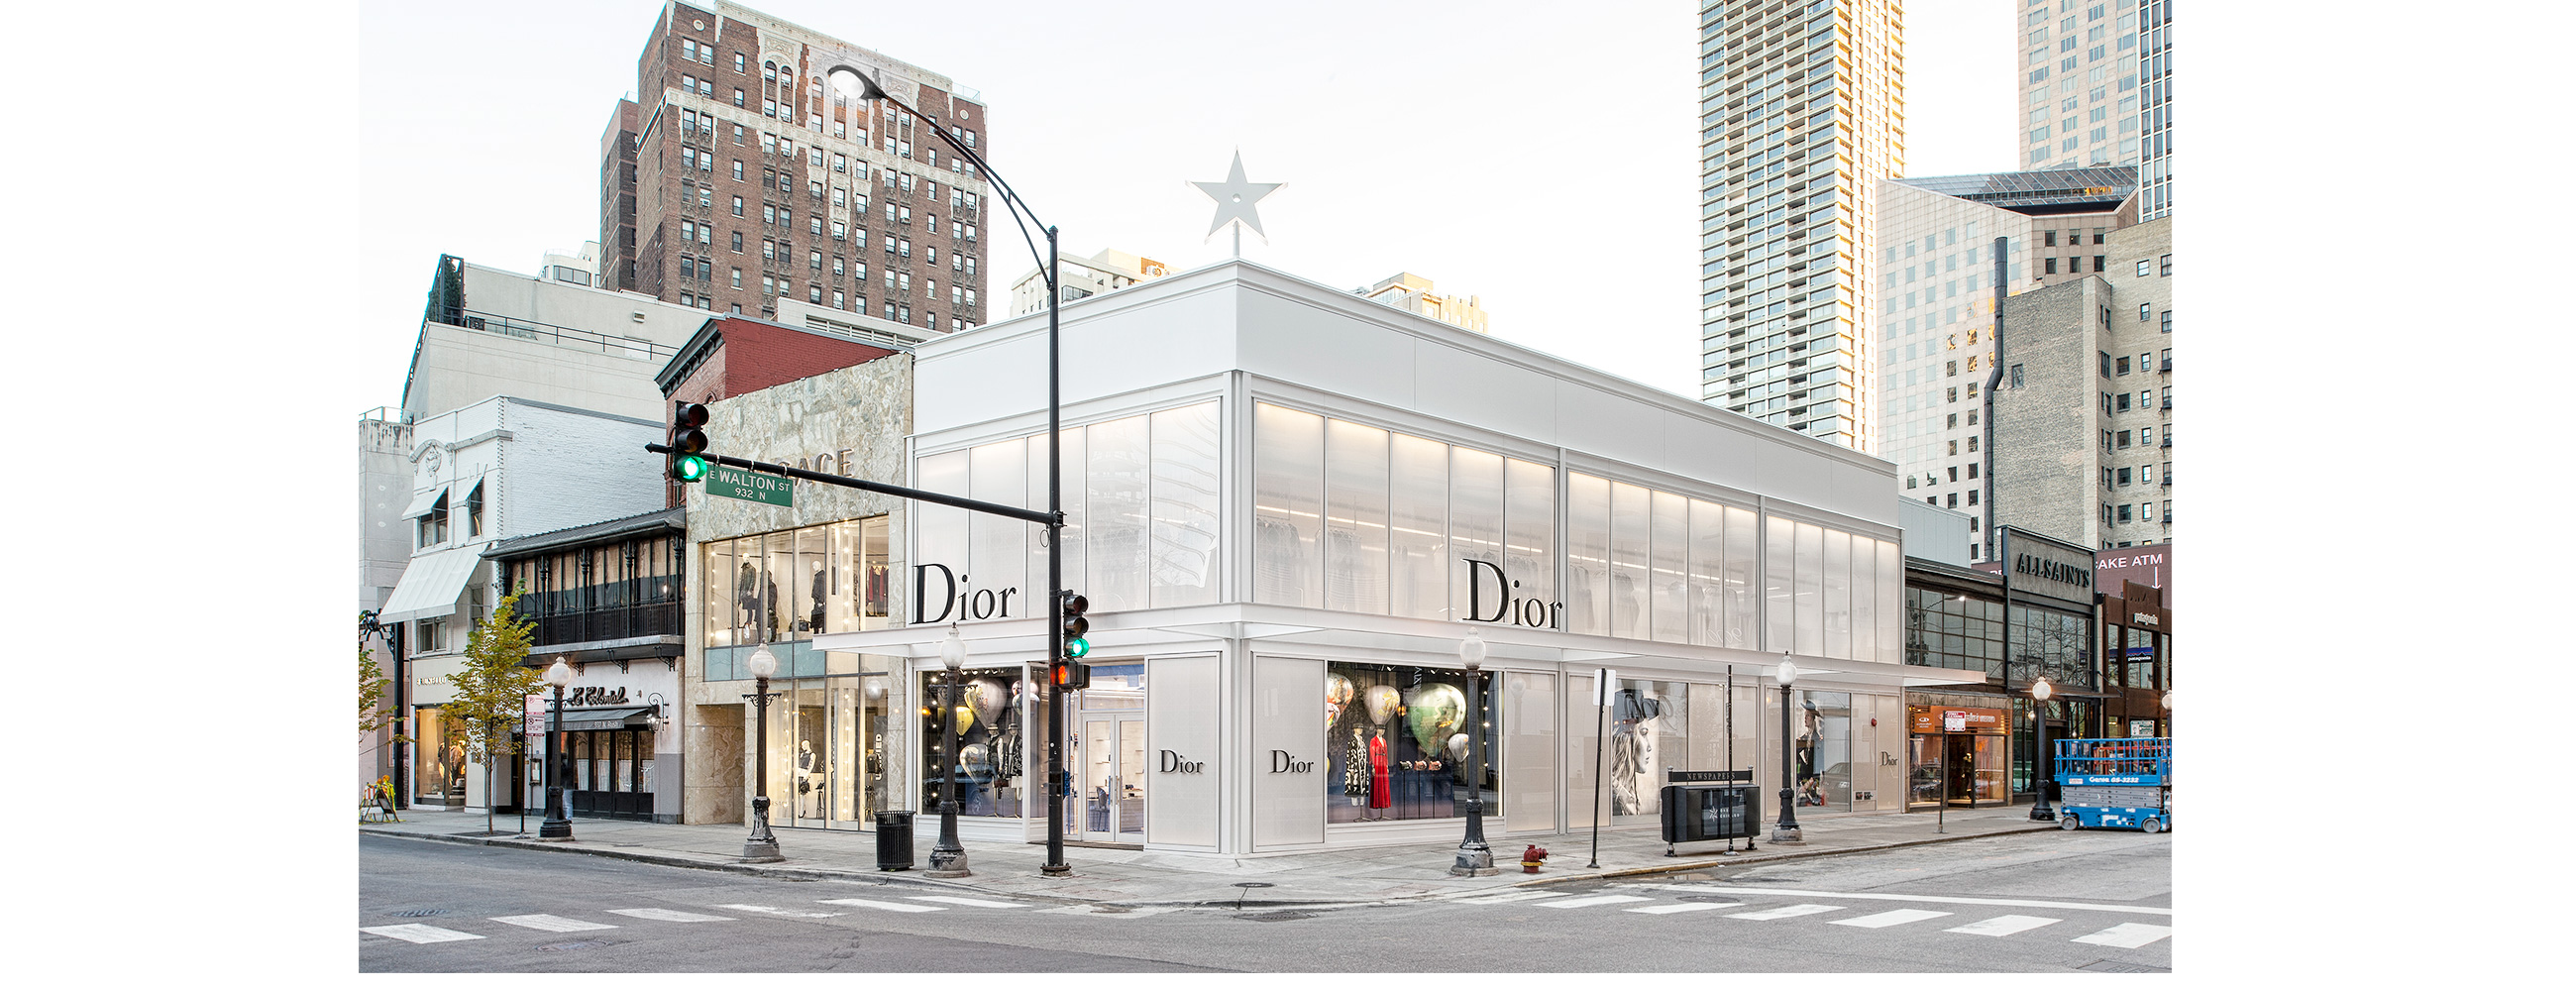 Exterior, street view of Dior flagship in Chicago, AGNORA fabricated Insulated Glass Units up to 146" in length, laminated, tempered, and digitally-printed.